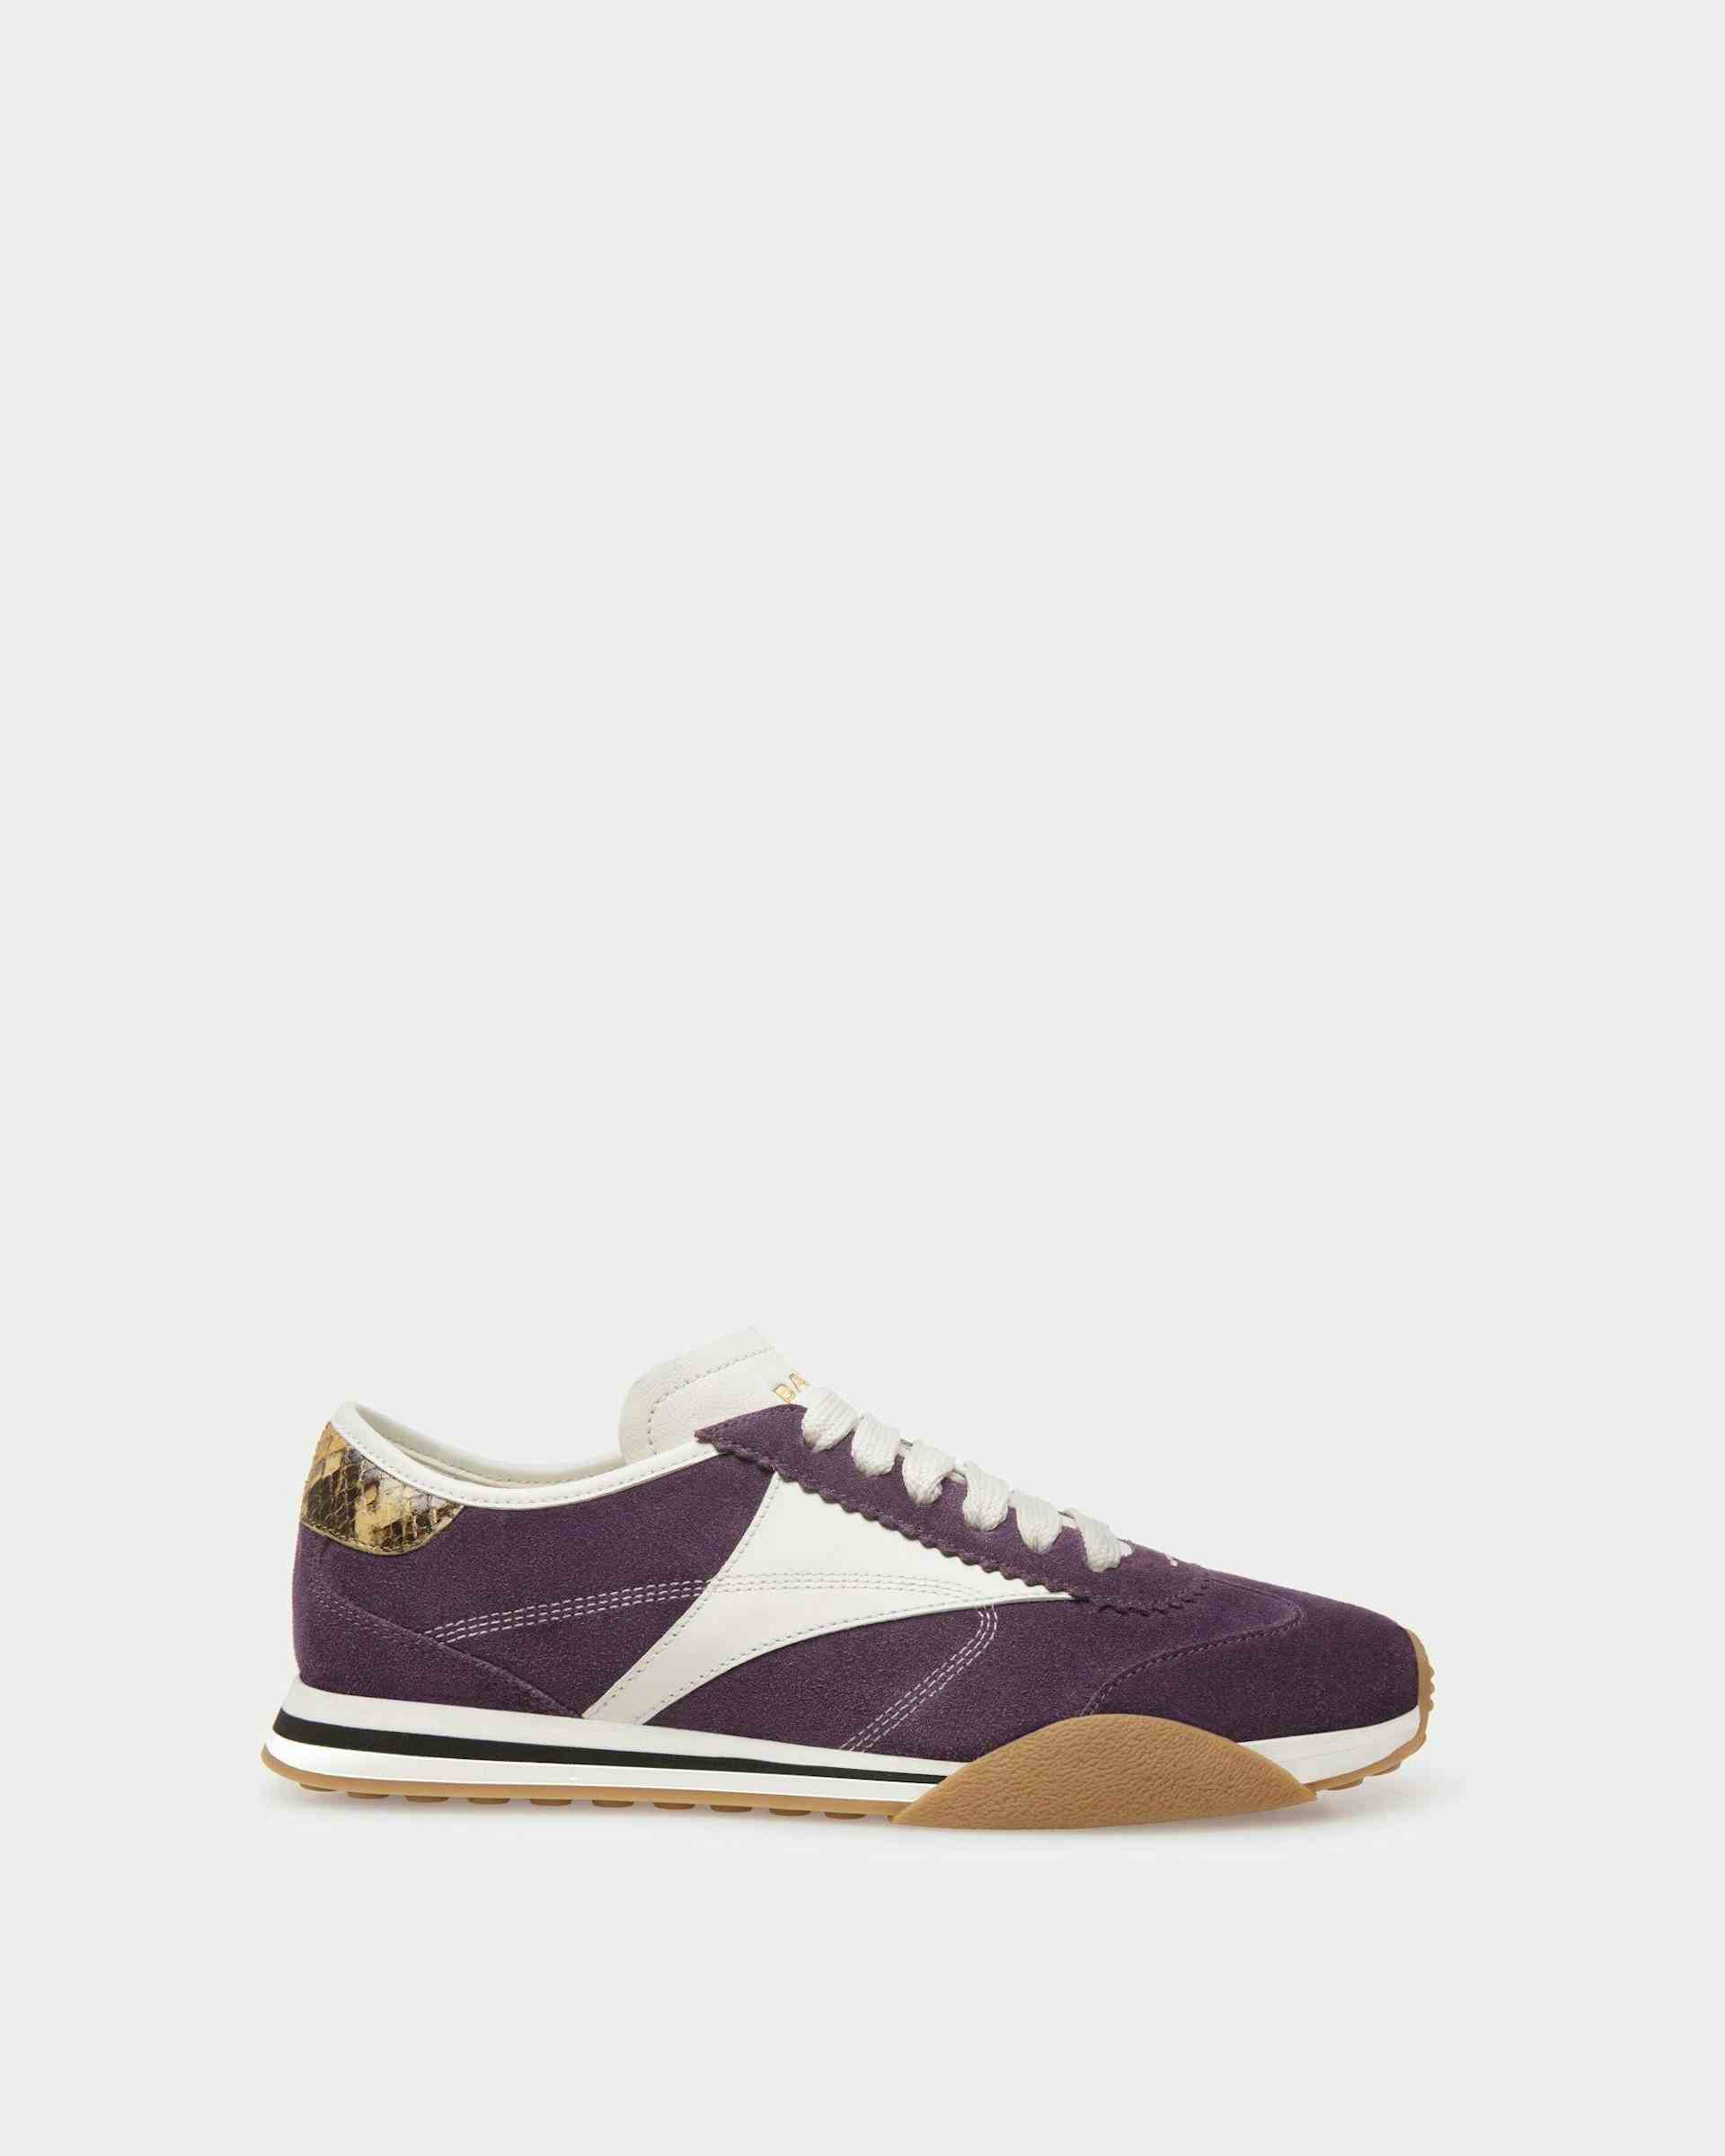 Sussex Sneakers In Orchid And White Leather - Women's - Bally